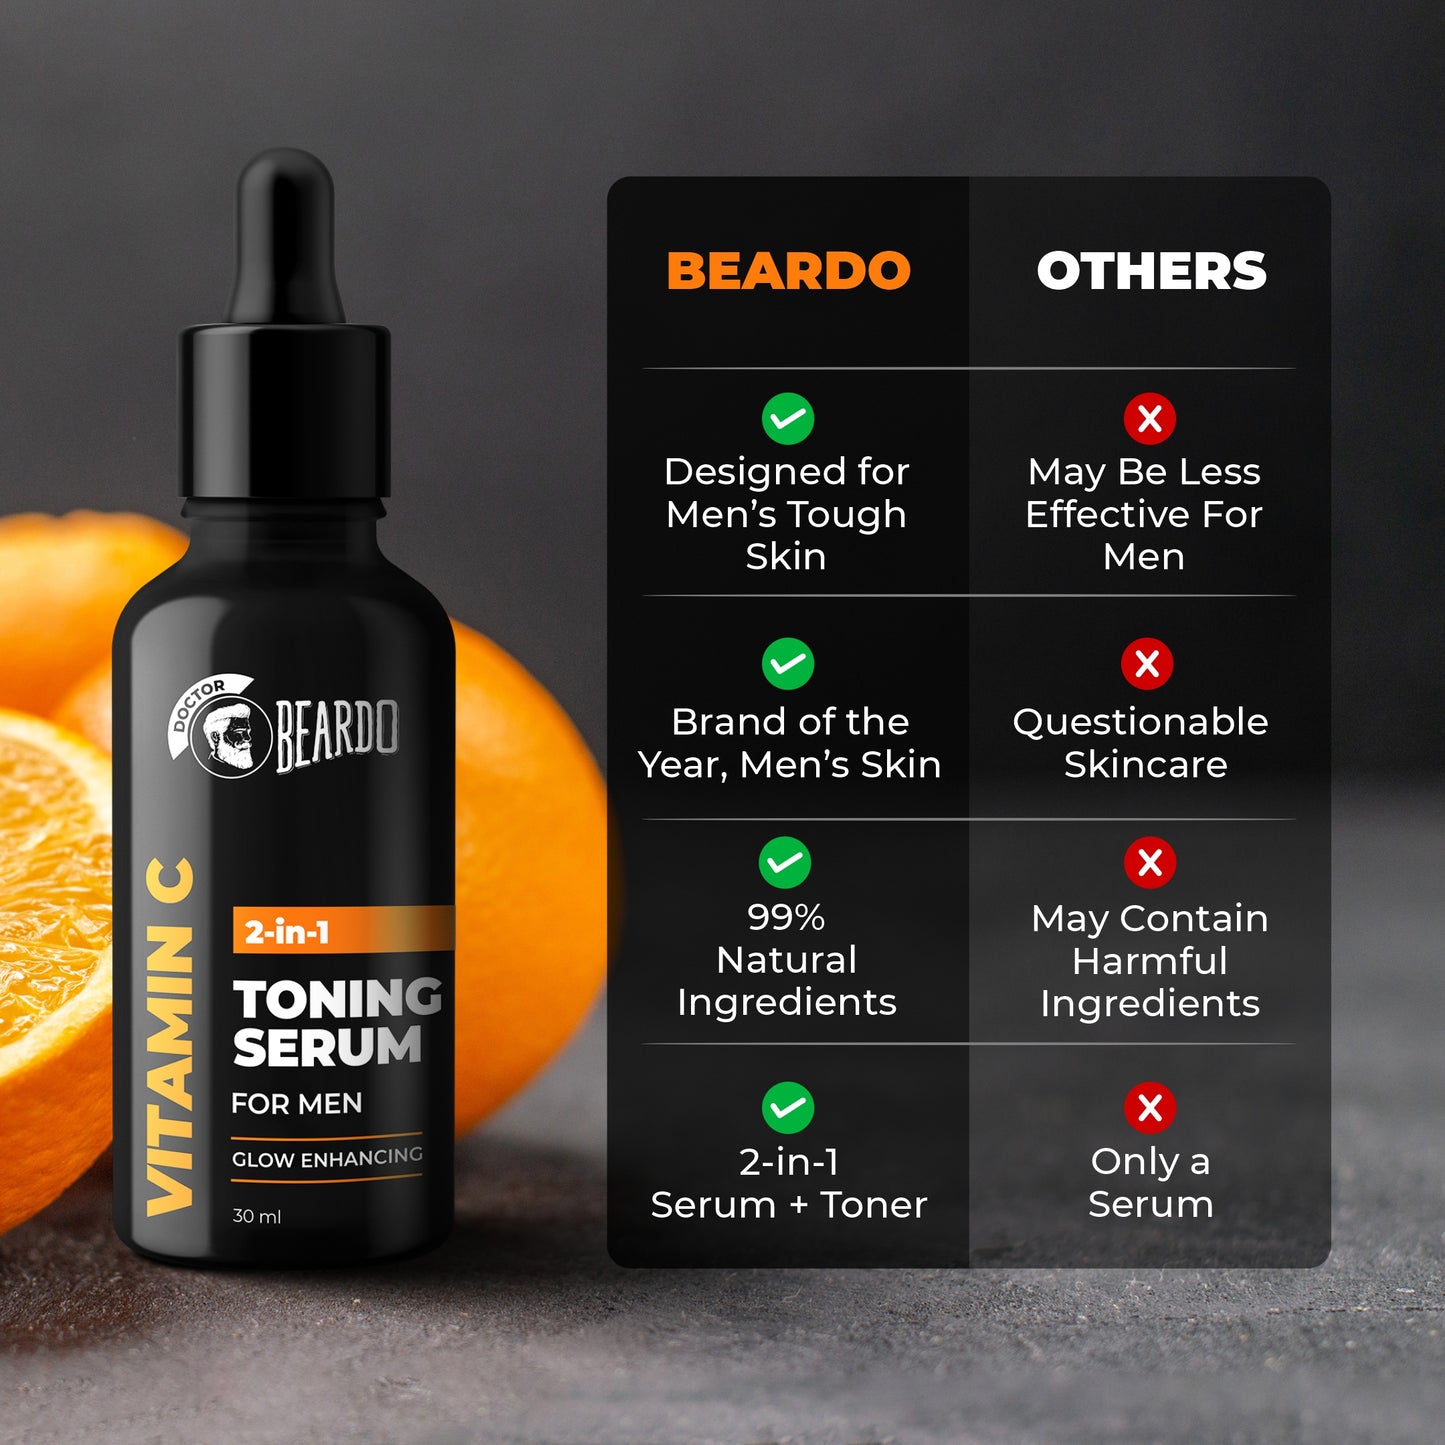 What is the use of Beardo vitamin C serum, How do you use Beardo toning serum, Which vitamin C serum is best for brightening skin, Which brand vitamin C face serum is best, Which is the No 1 vitamin C serum in India